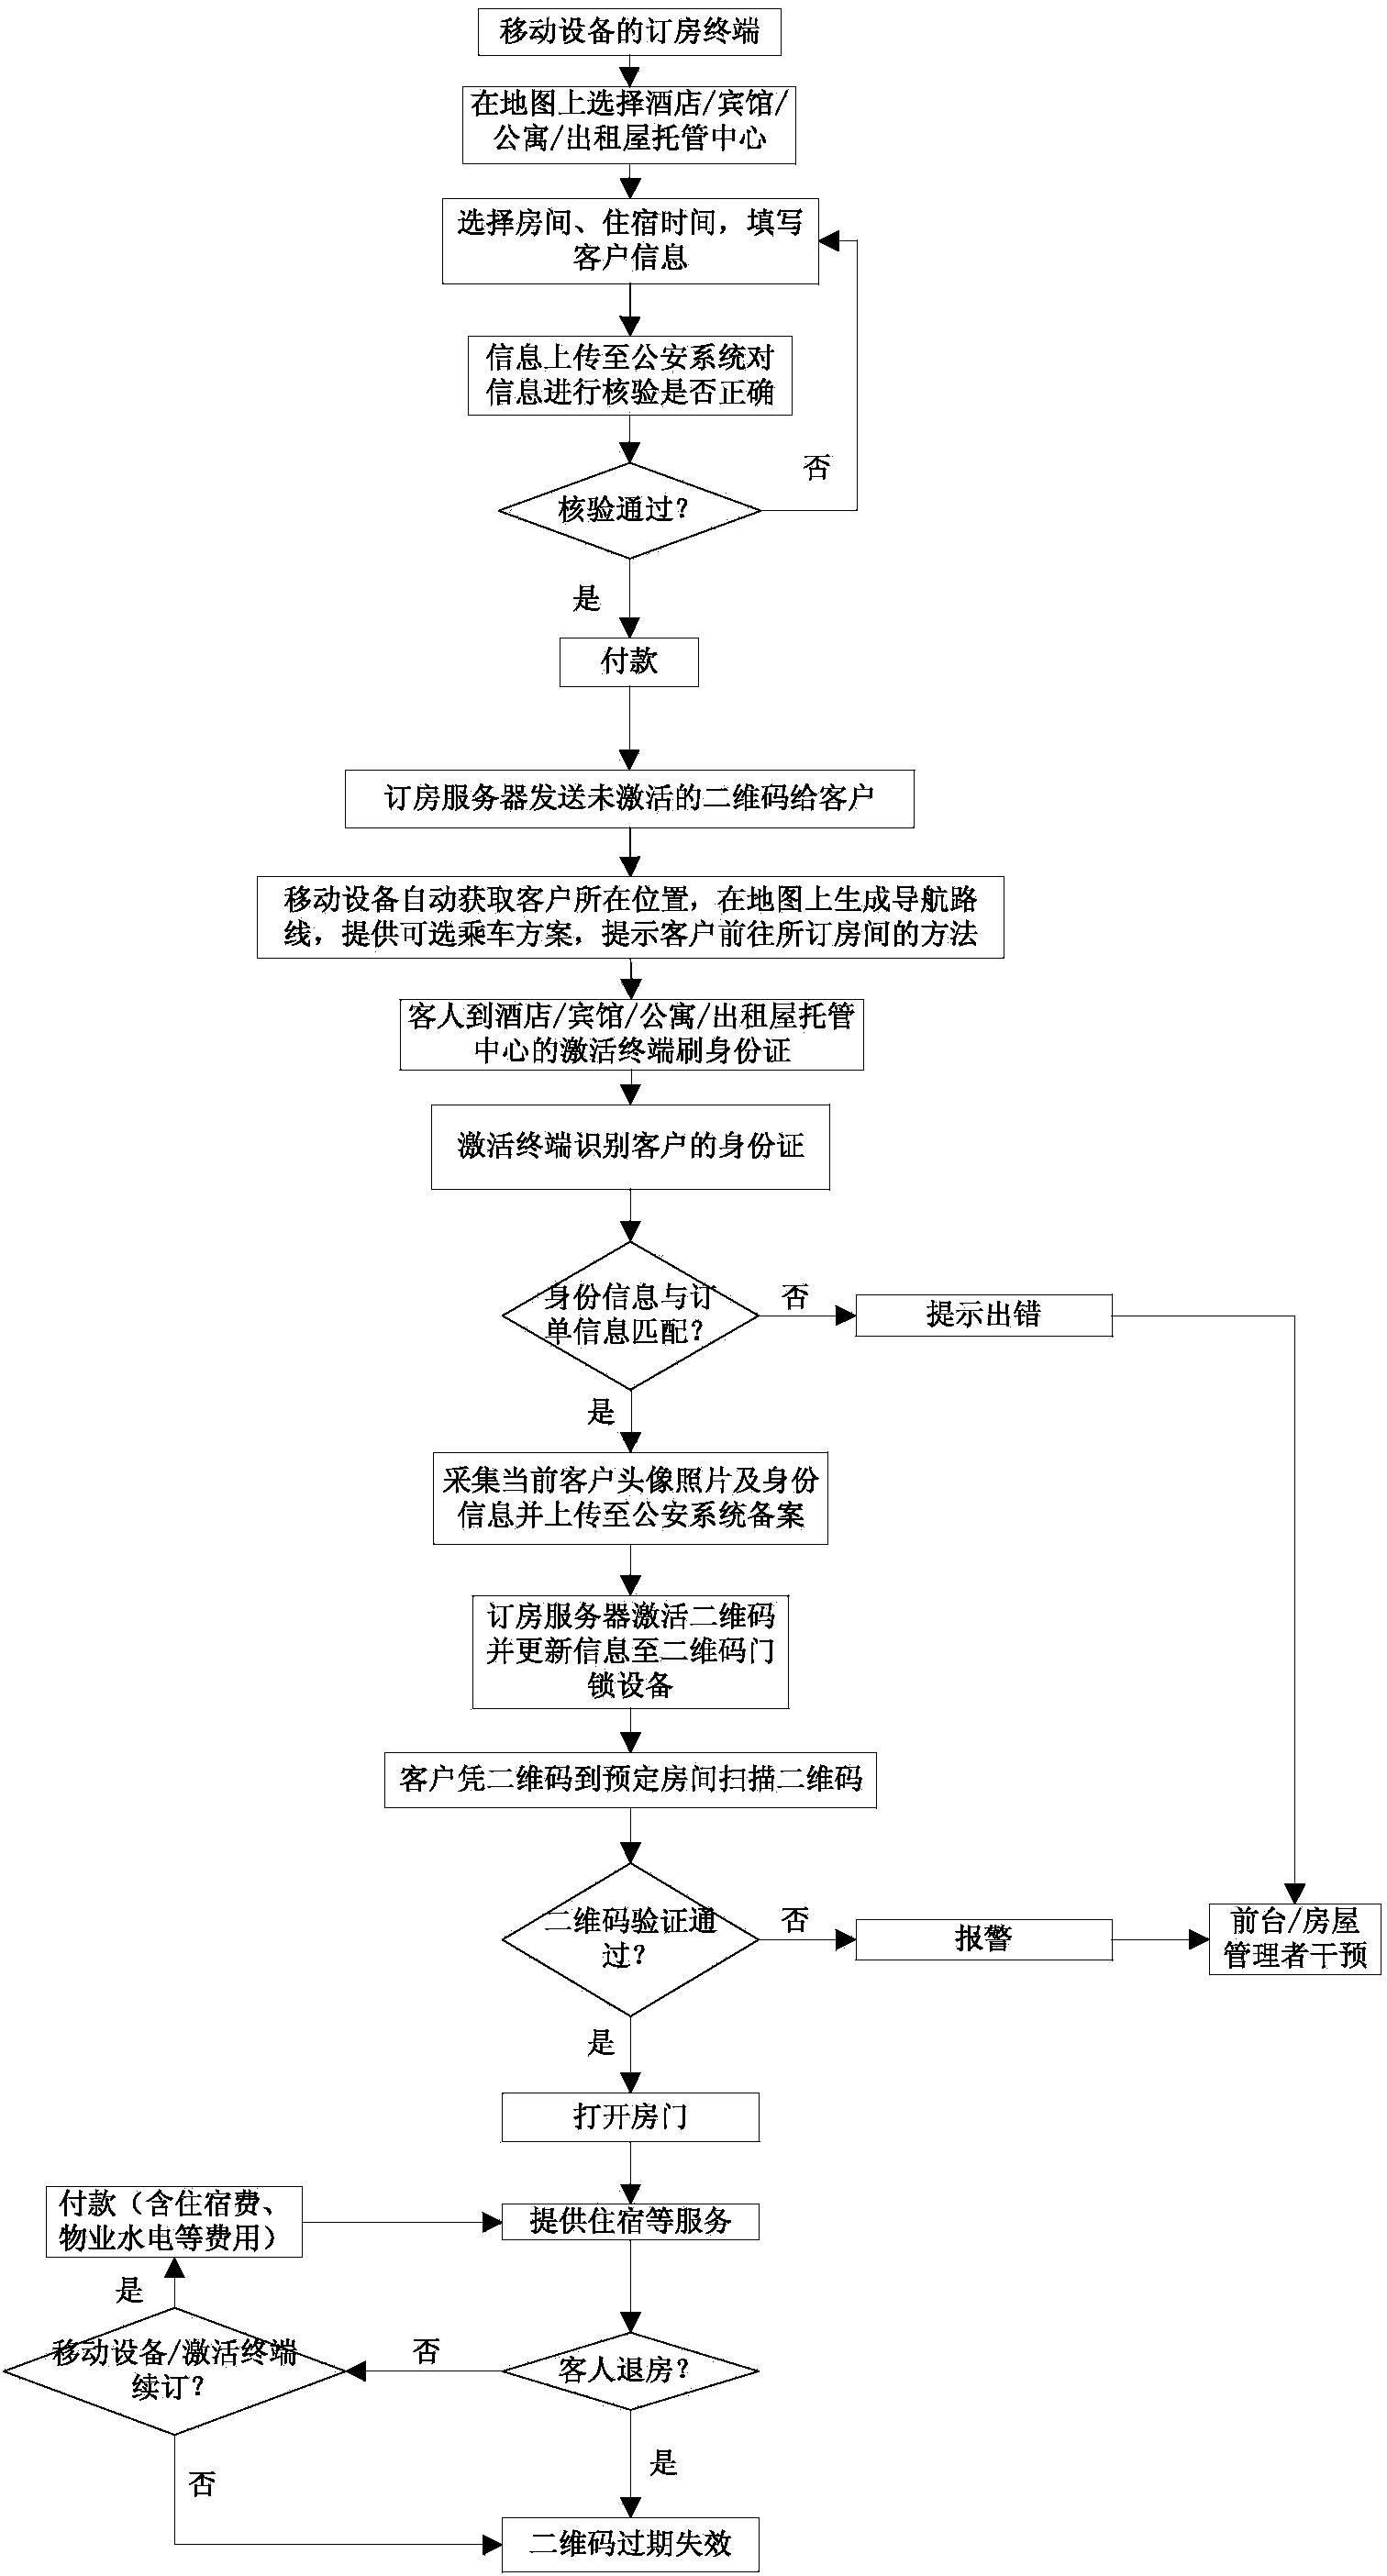 Self-service room reservation method and system based on mobile device